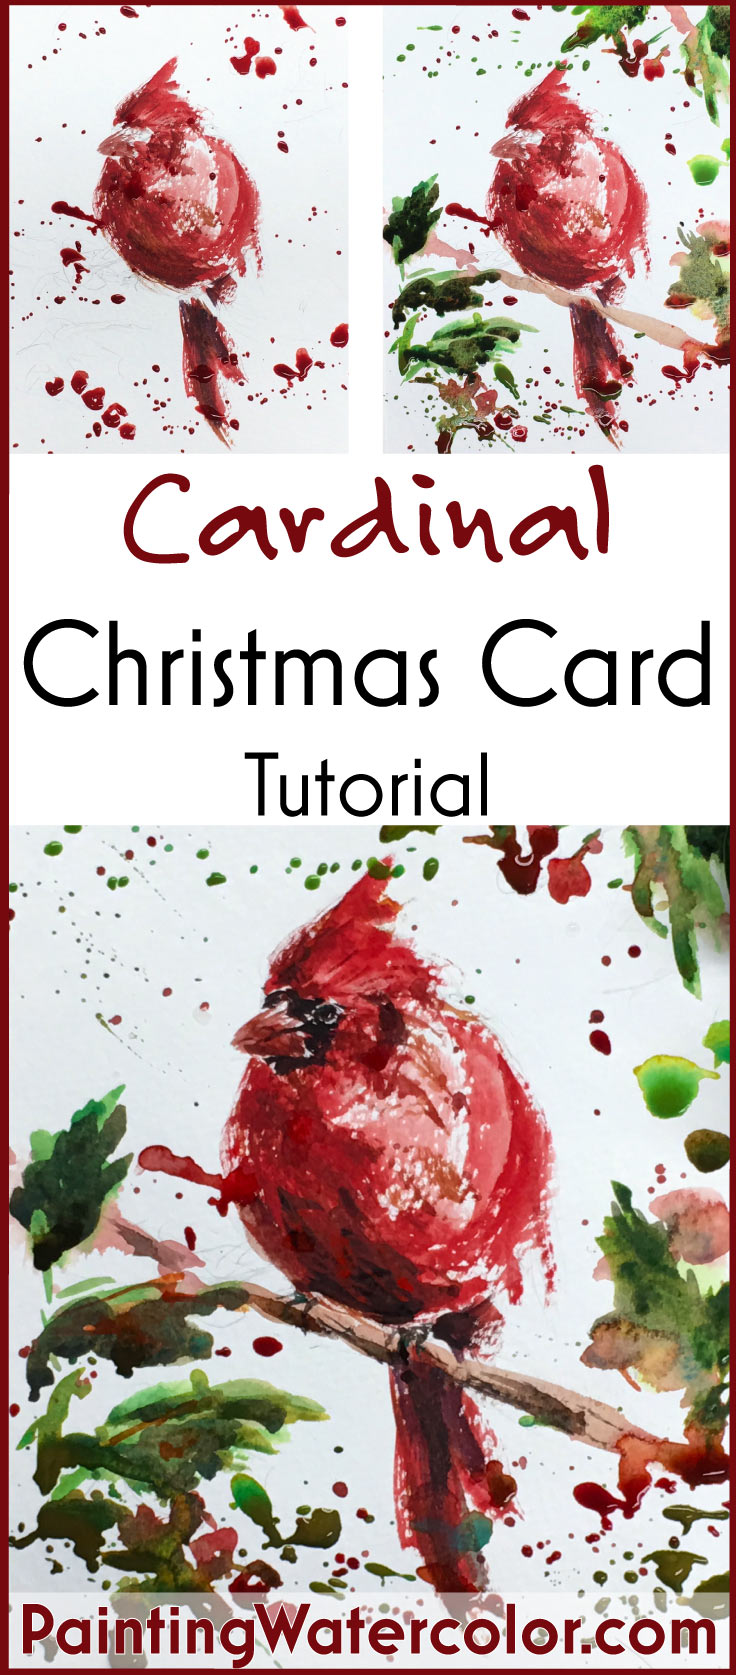 Paint beautiful Christmas cards for your family and friends! I show you step by step how to paint a beautiful cardinal bird.